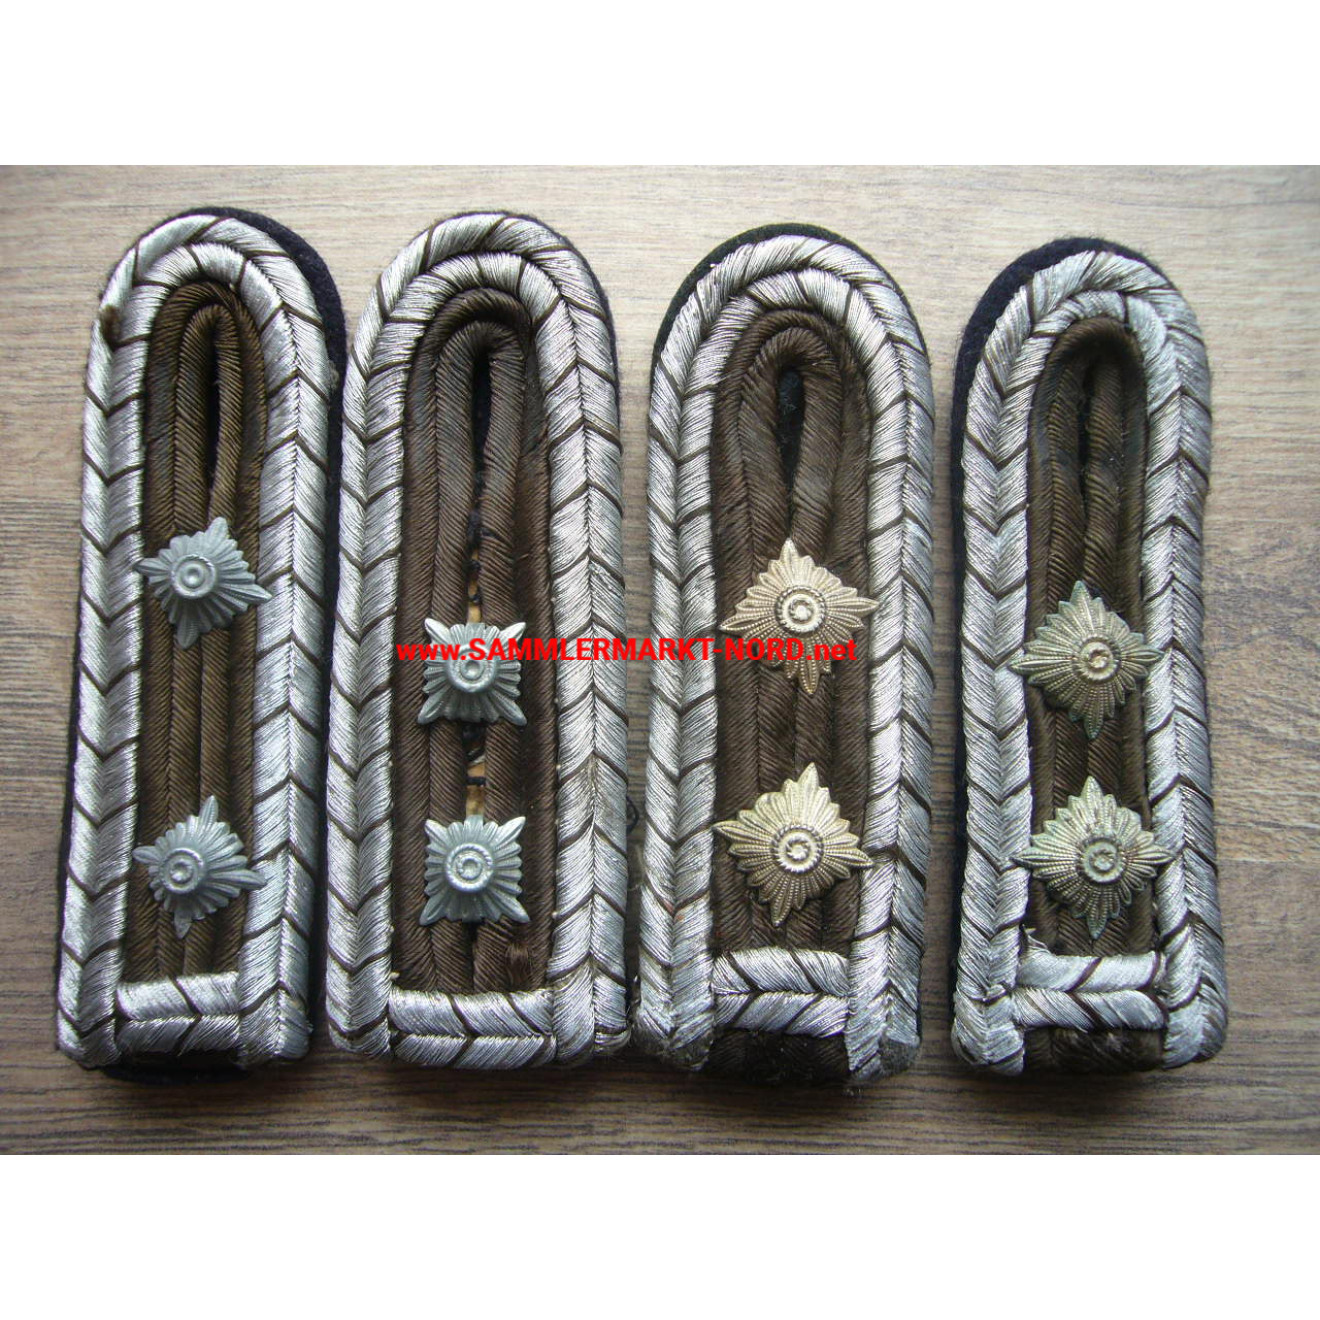 Police veterinary service - 2 x pairs of shoulder boards Hauptwachtmeister